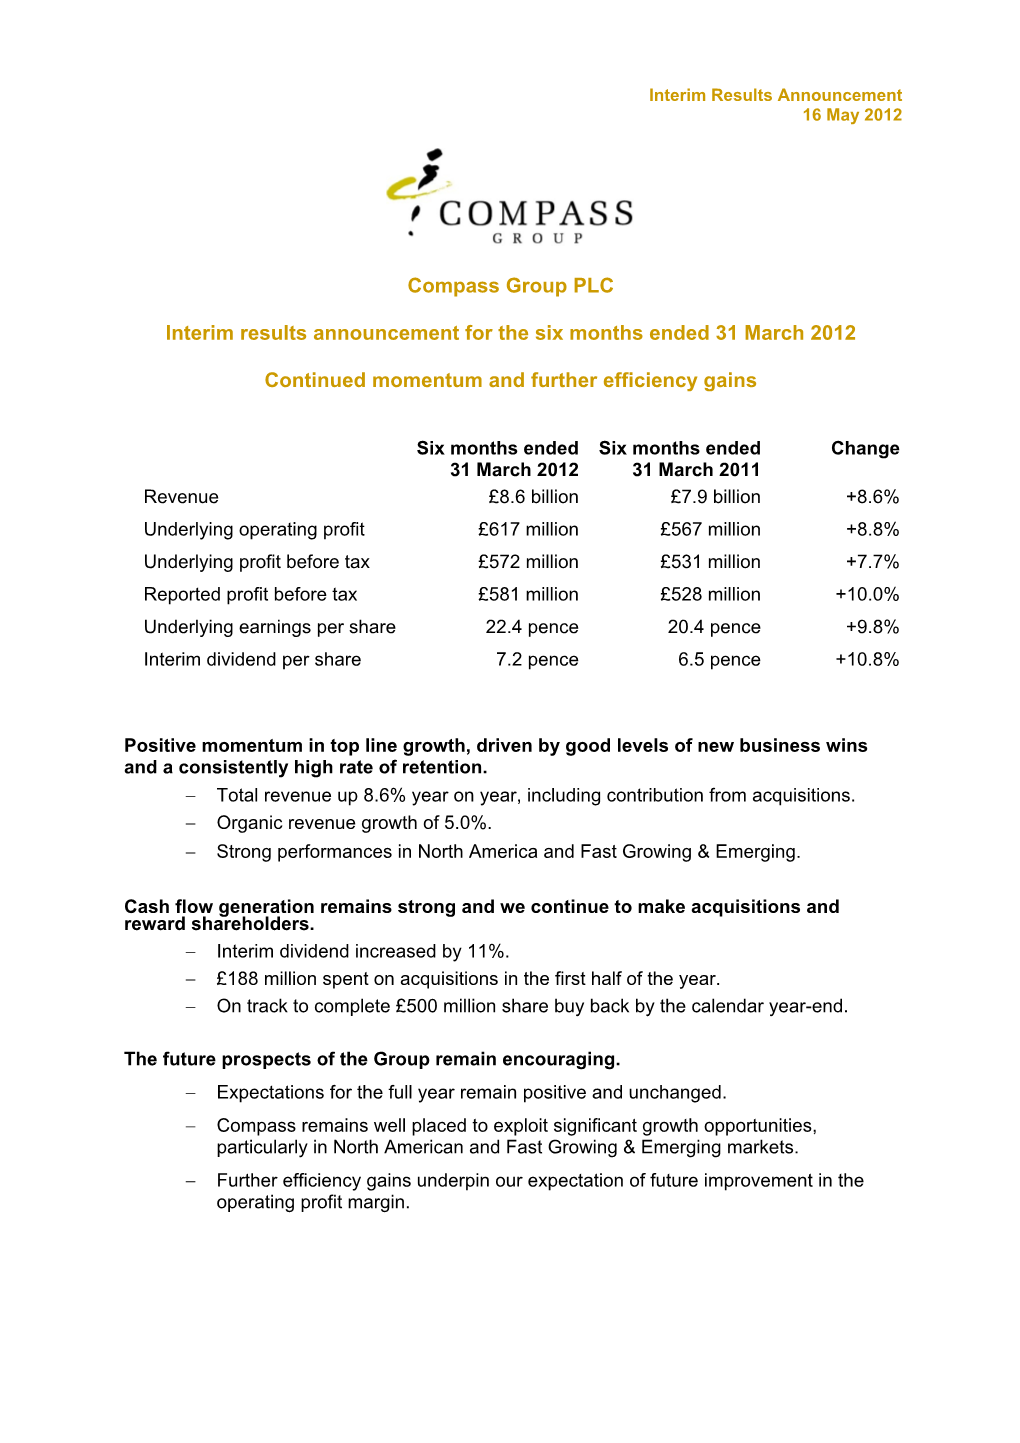 Compass Group PLC Interim Results Announcement for the Six